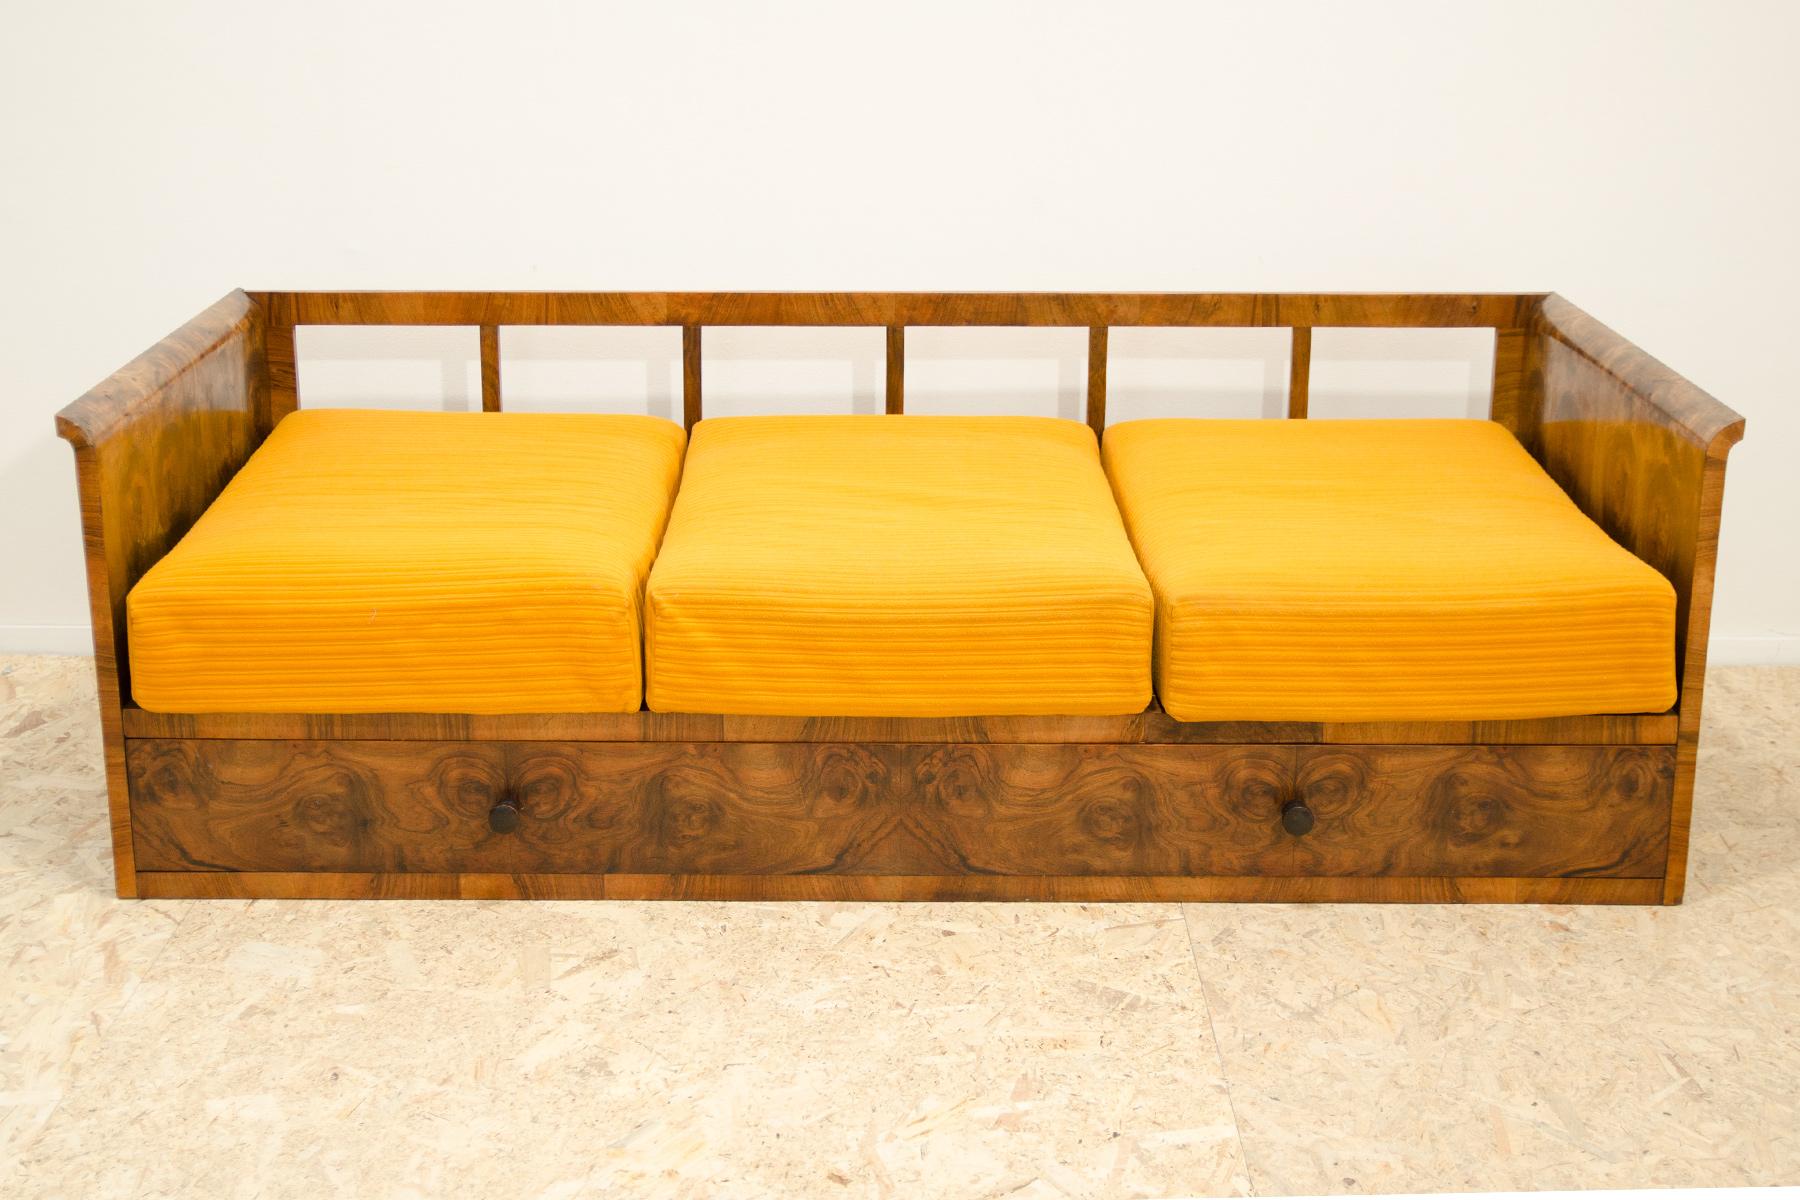 This Art Deco sofa with storage was made in the 1930s in the former Czechoslovakia. This piece is an example of the Czechoslovak Pre-war Art Deco style and it features a wooden structure that is veneered in the walnut. Sofa is in very good